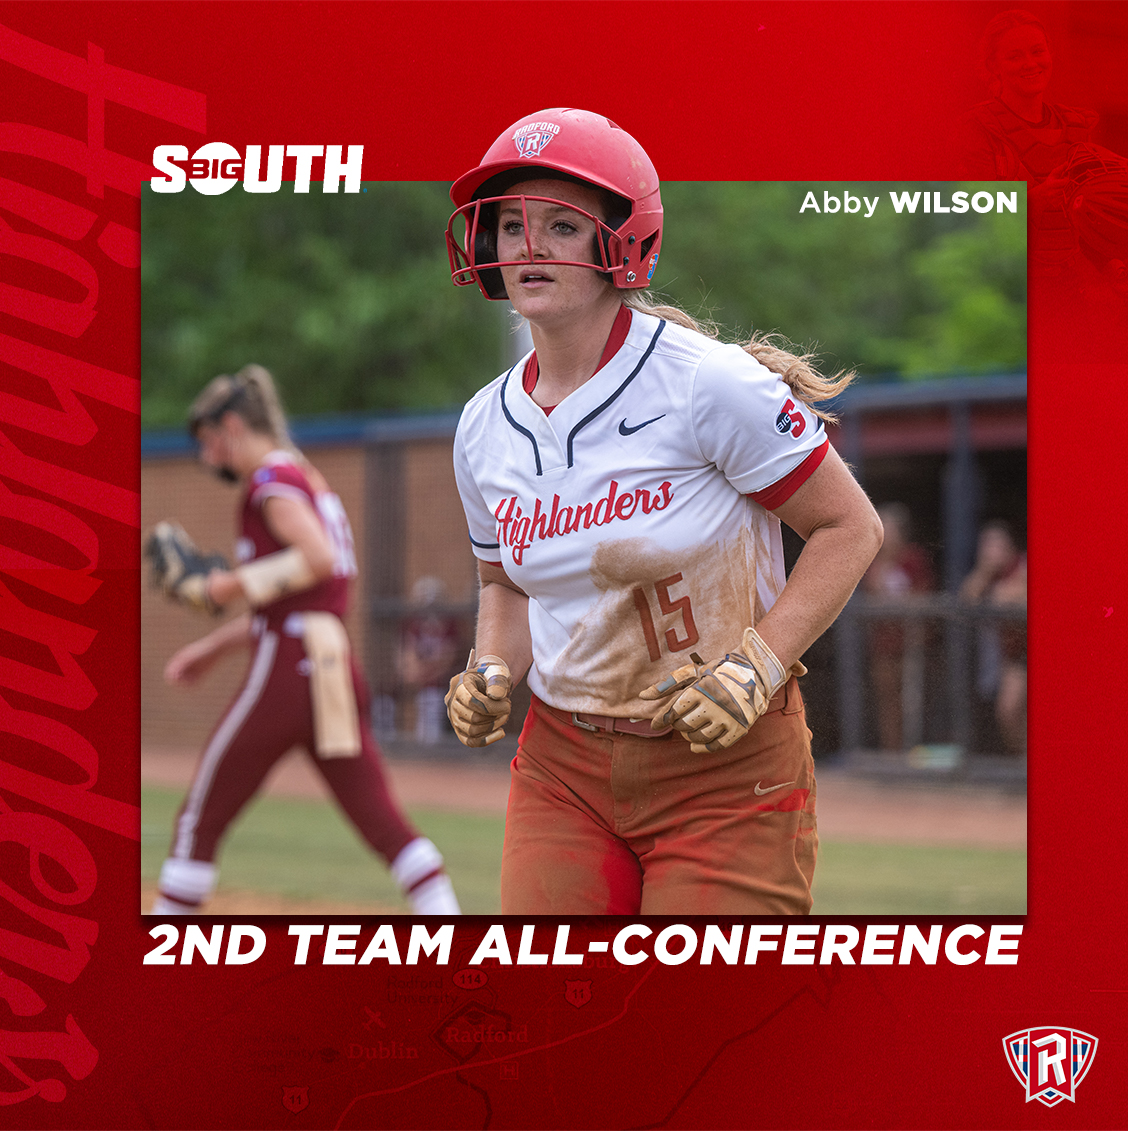 Abby Wilson takes home a well-earned conference award! 🫡 #RiseAndDefend